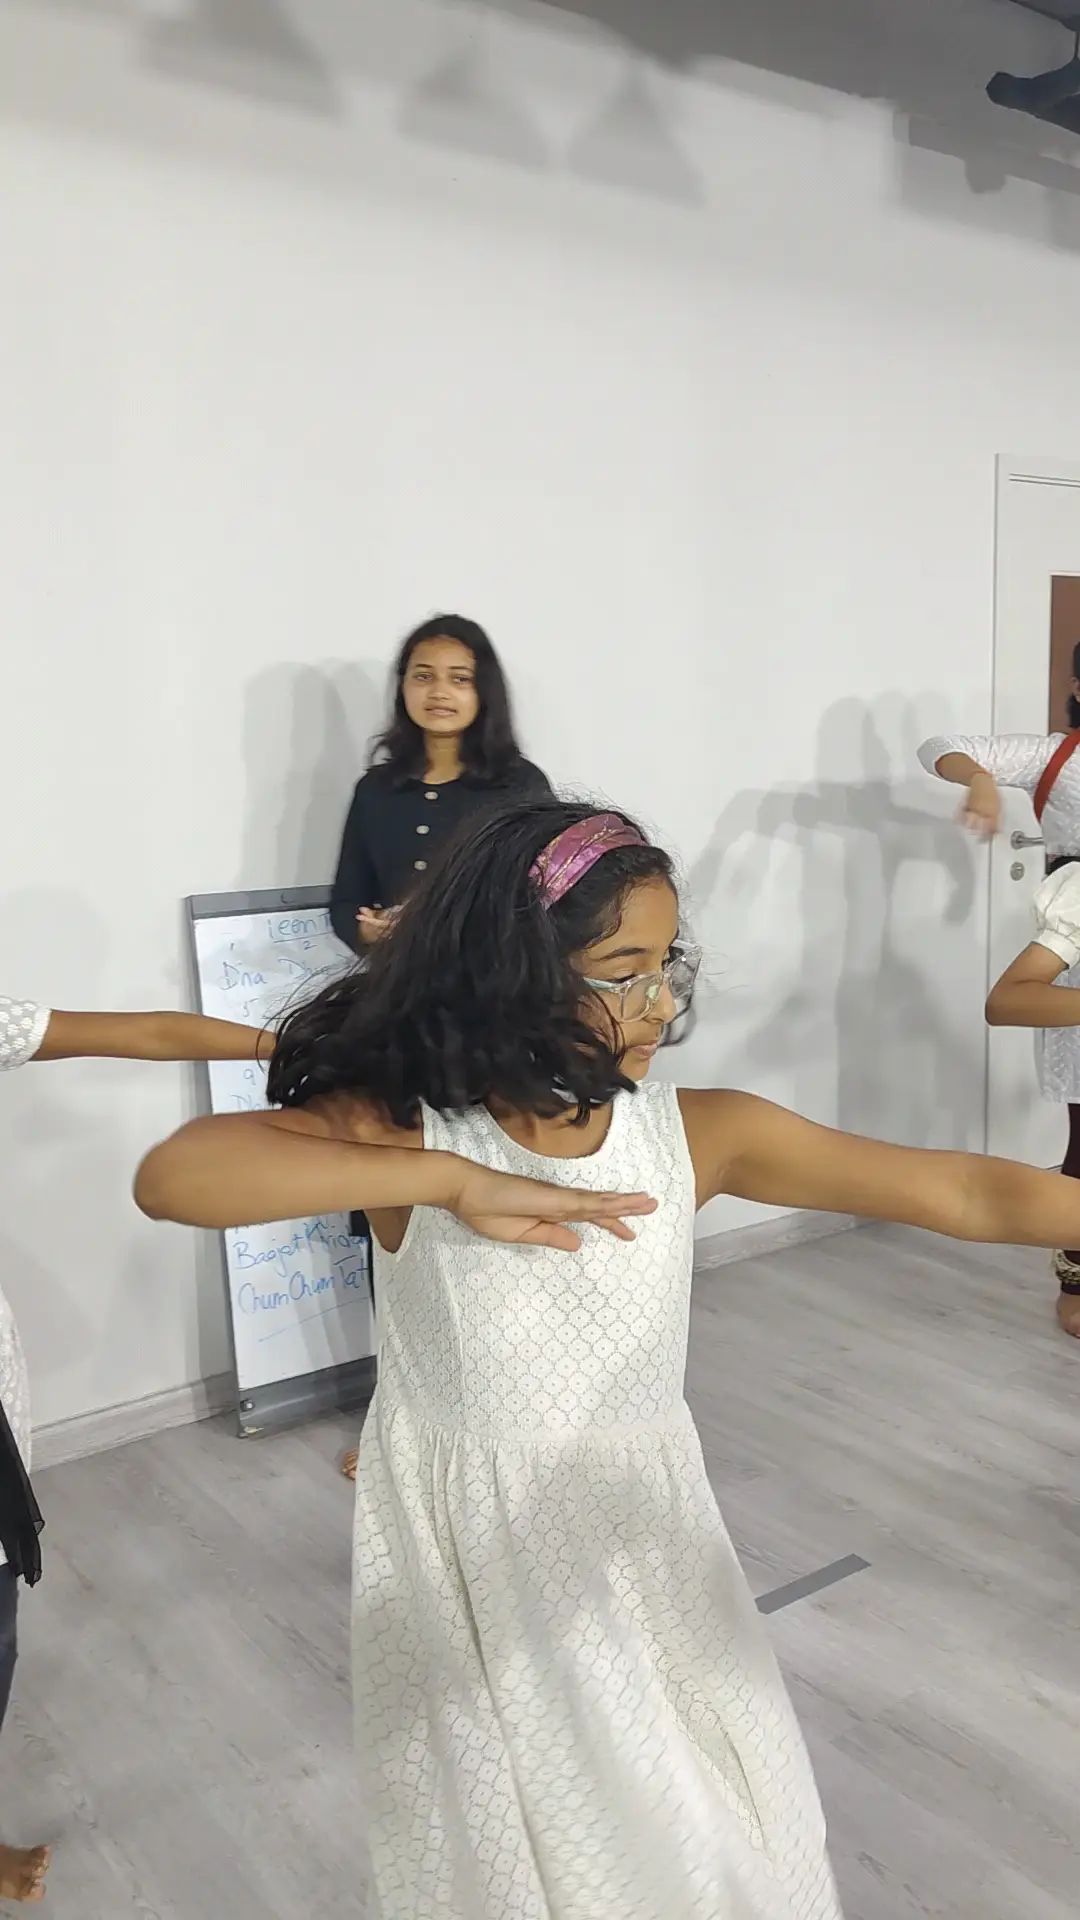 Gurukul vocational student @harshi.m07  Harshita Mahesh supporting grade 2 session. Teaching is the best way to gain confidence in your own abilities.  Something that we at Gurukul strongly believe in. You may or may not aspire to be a dancer, but a confident person we all would like to work towards.